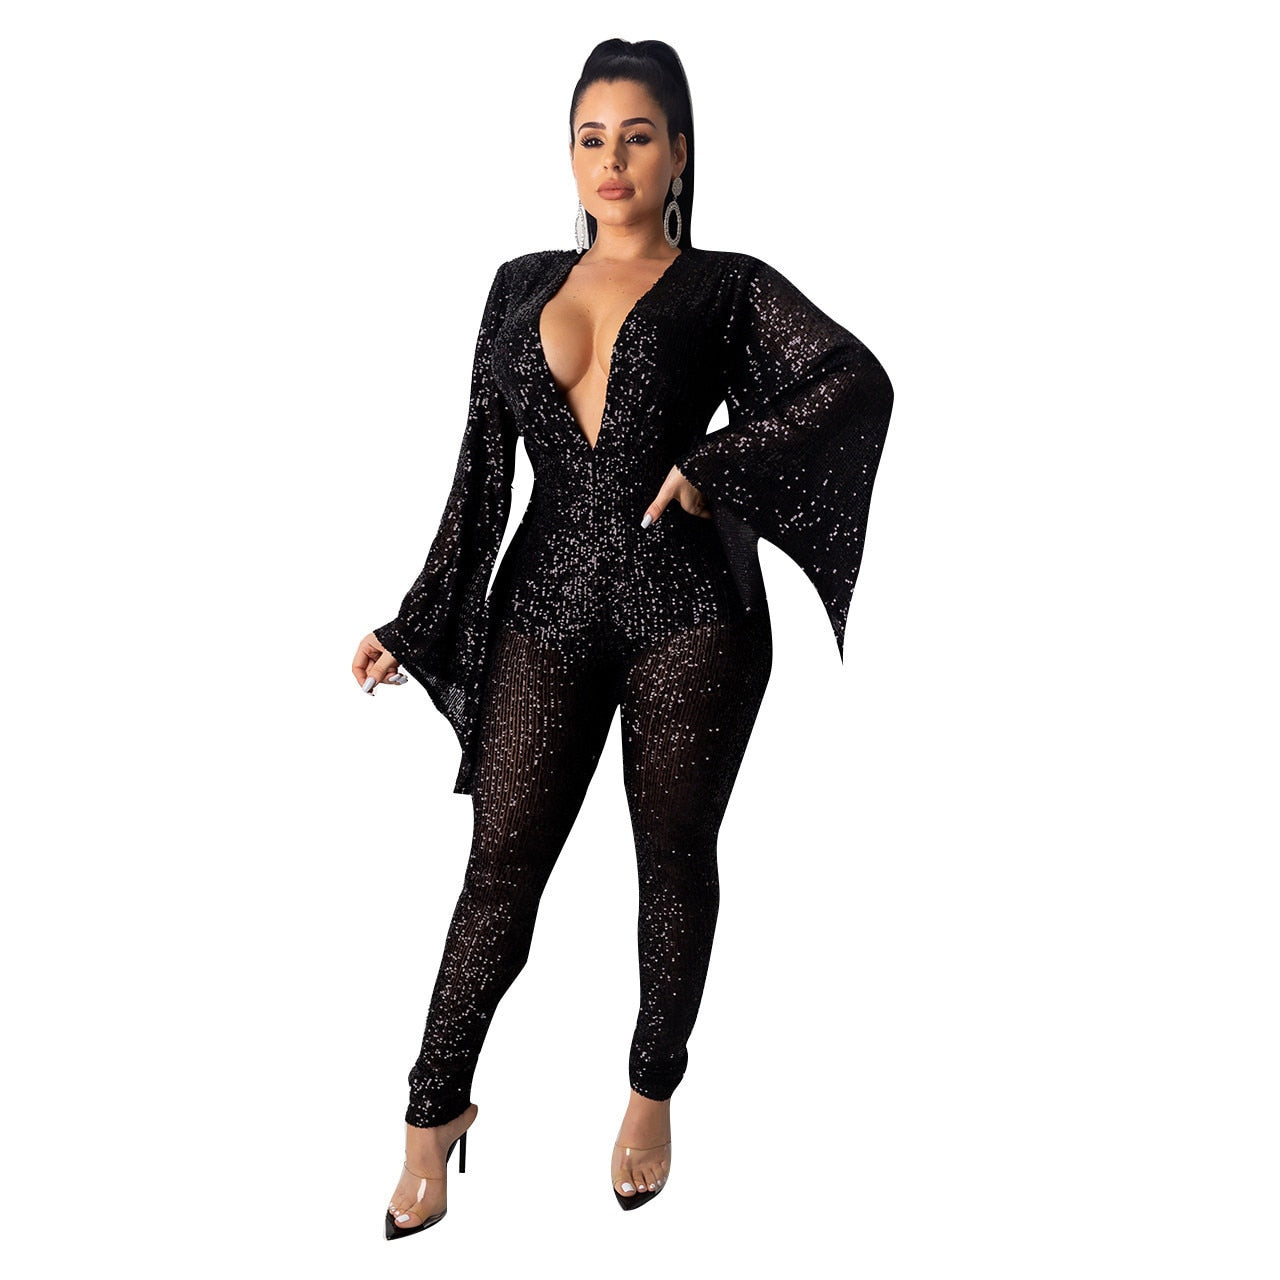 VAZN Hot Sale Sexy O-neck  Sequins Glitter Office Lady Women Sleeveless Banquet Party Beach Jumpsuits Full Pant Bandage Rompers